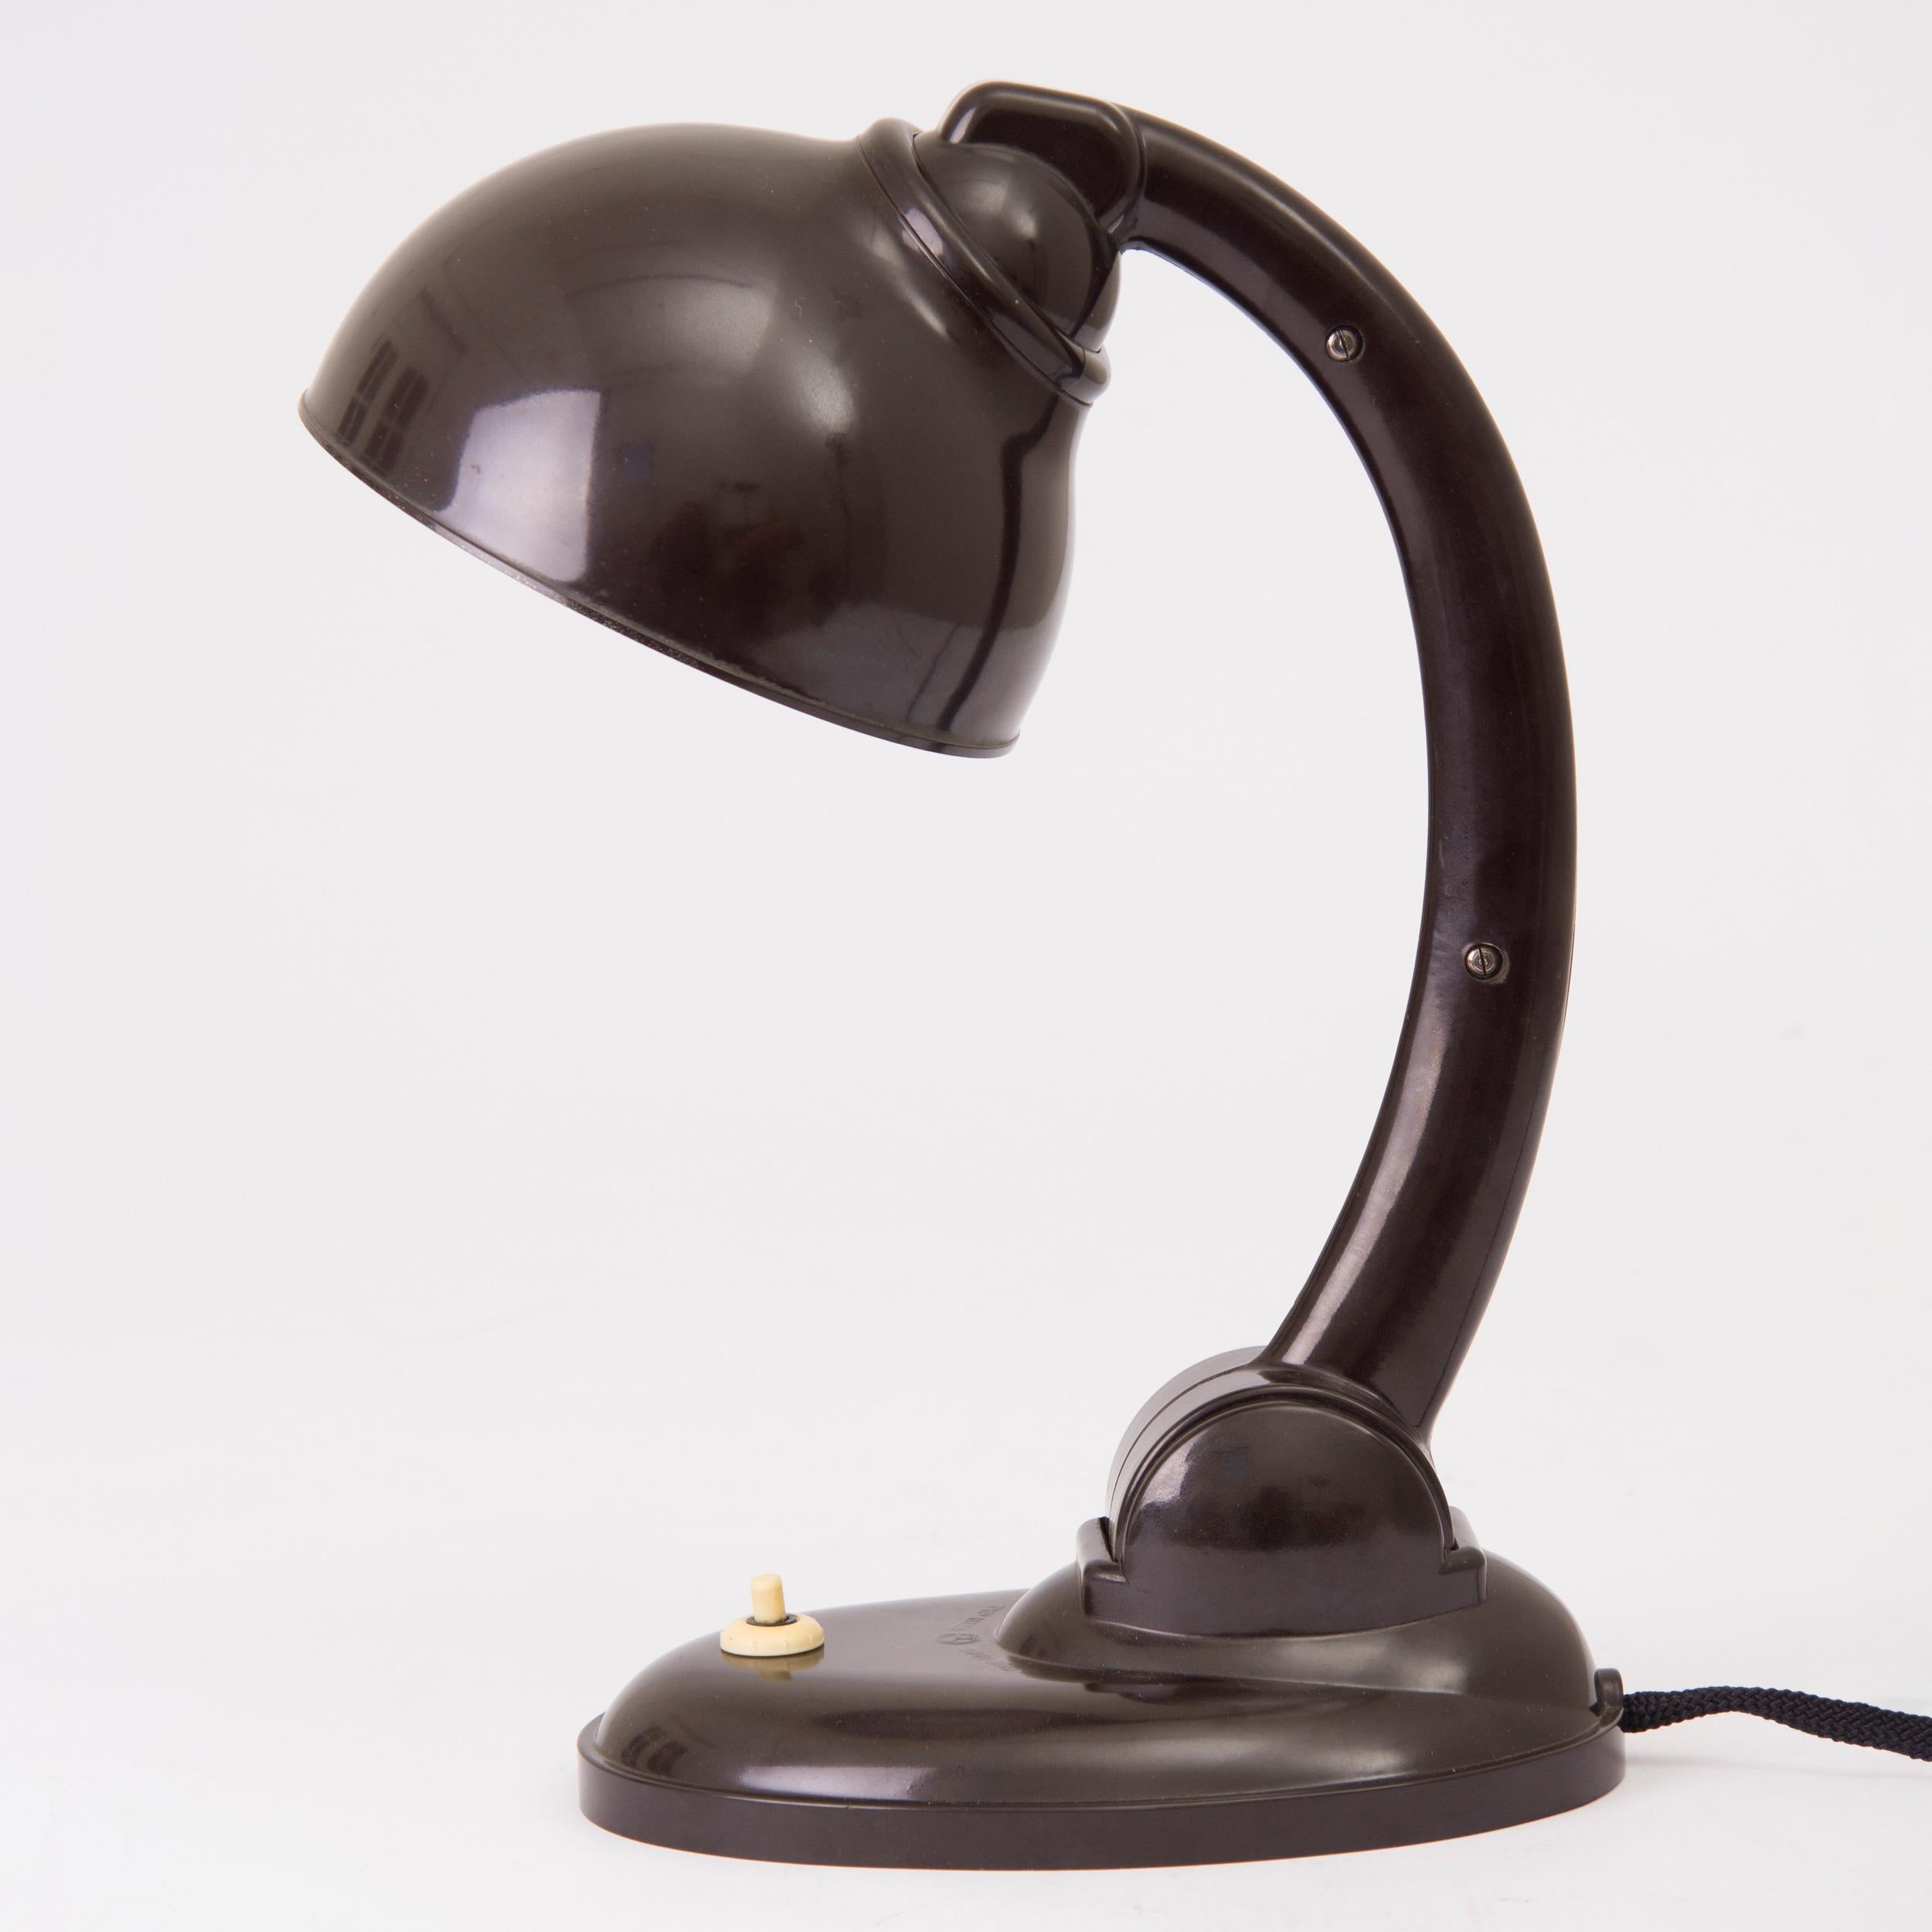 Art Deco bakelite adjustable desk lamp
designed by Eric Kirkman Cole, Art Deco stylish table lamp in brown bakelite. A model designed in the 1930s and produced in European countries under License. The shade is mounted to a shoulder joint and can be